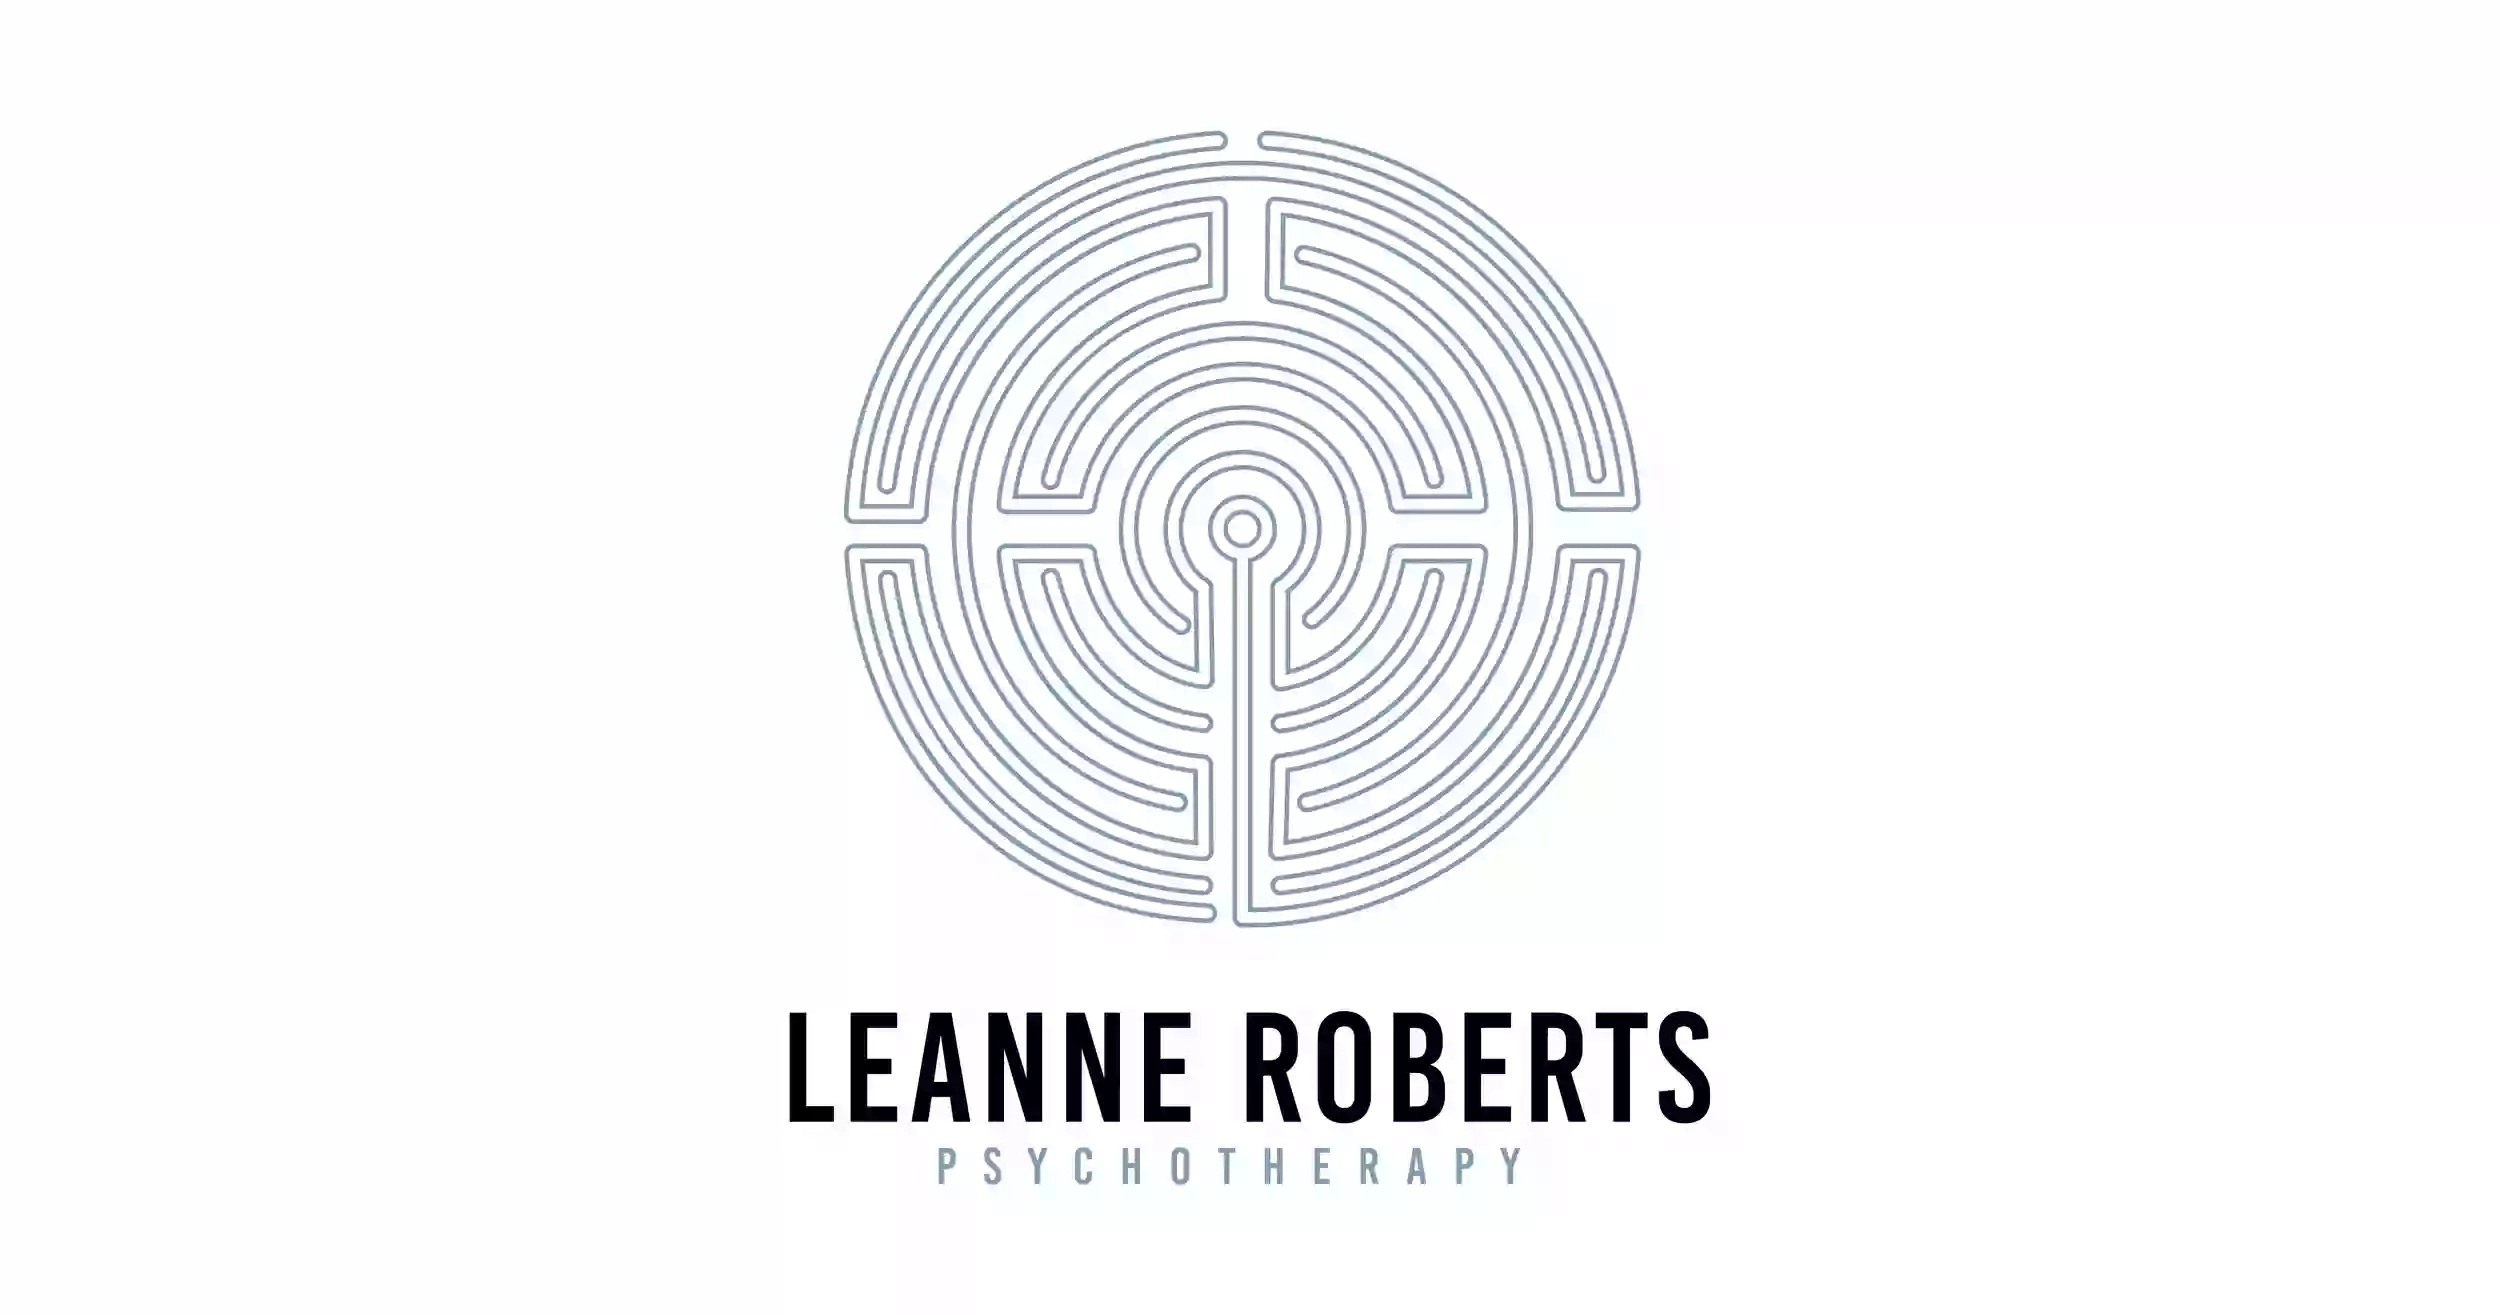 Leanne Roberts Psychotherapy